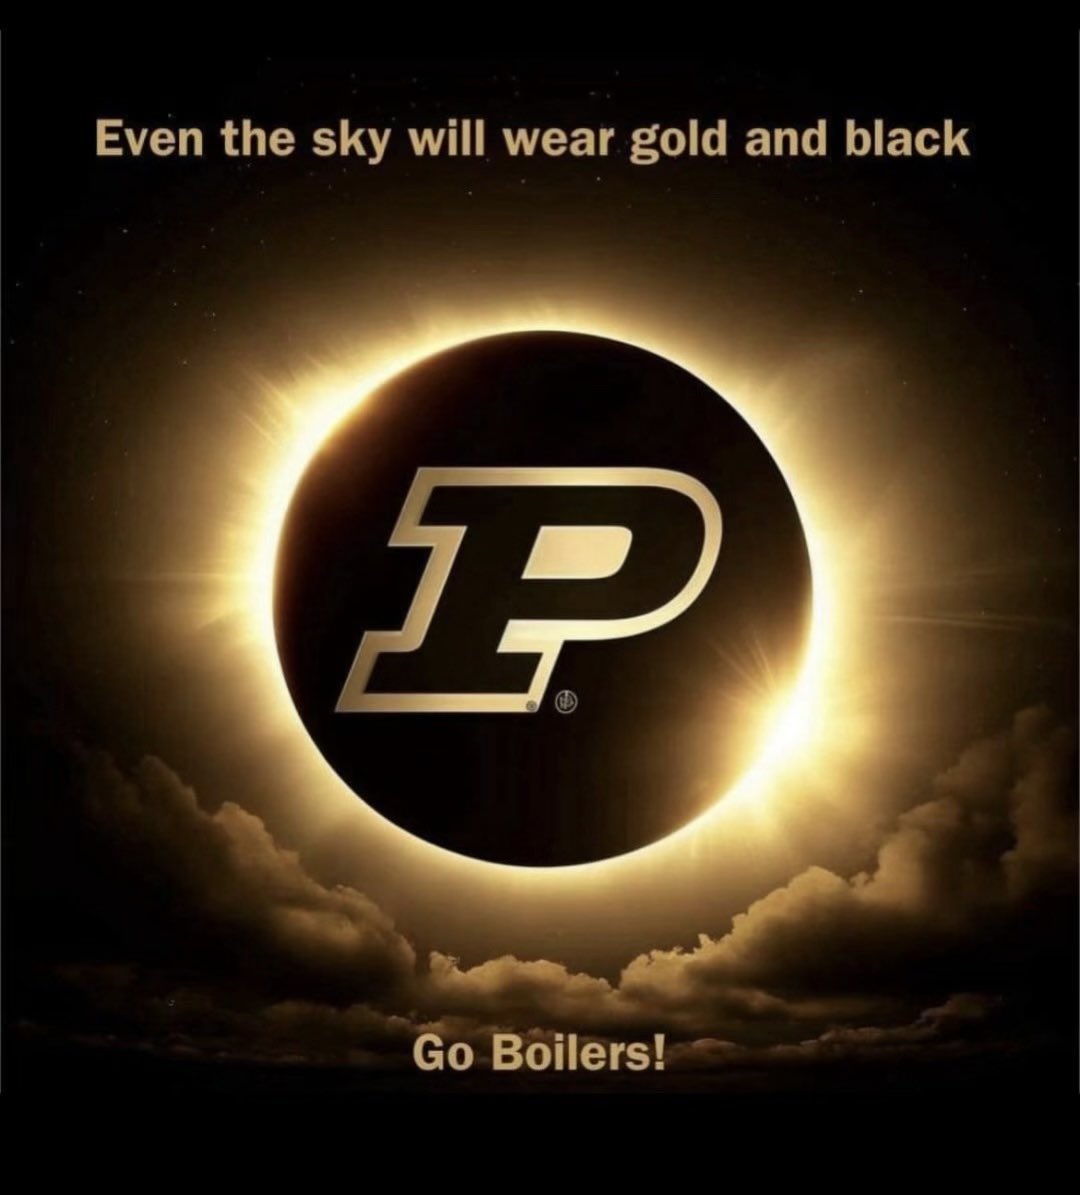 Big day for Mommy’s alma mater today! Go #Purdue!!